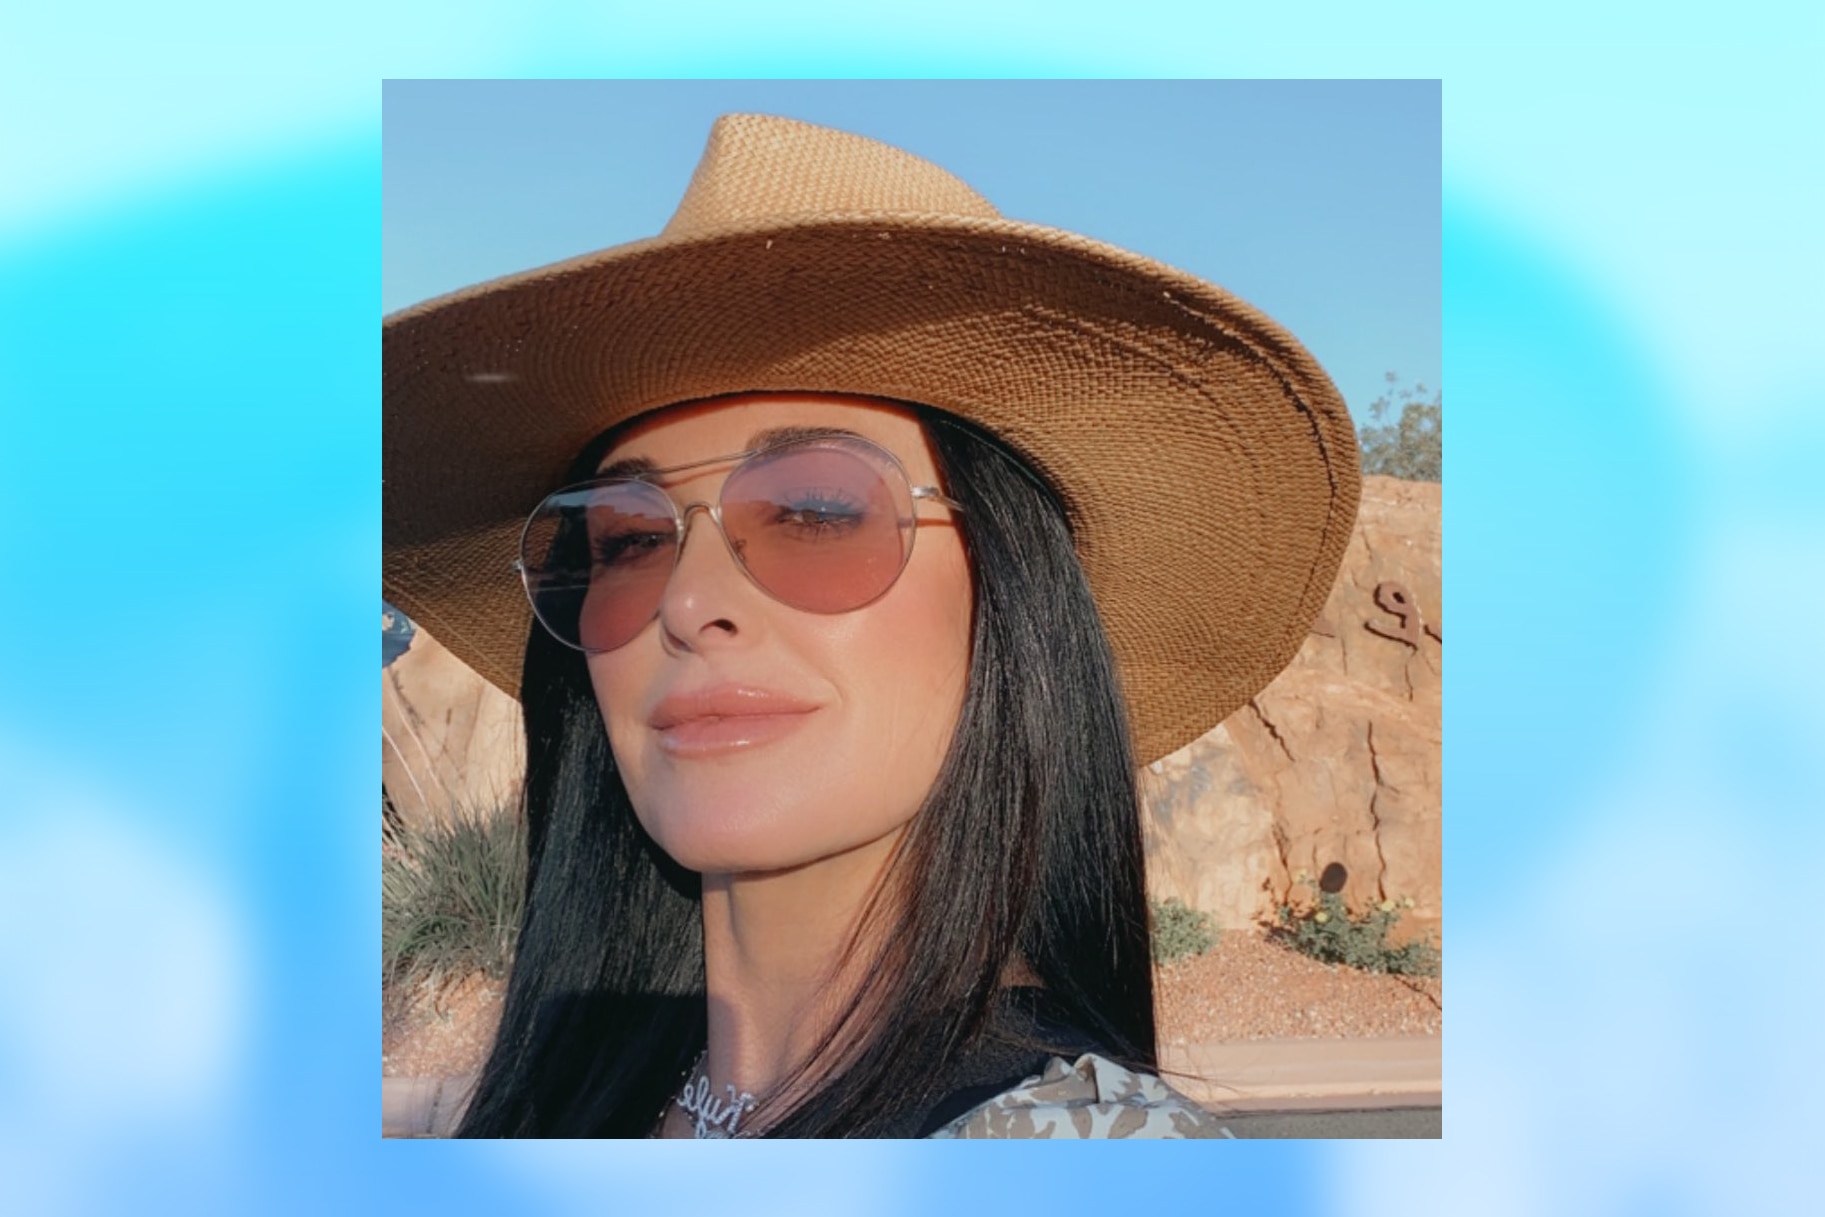 Kyle Richards Shows Off Her Bikini Body in Sexy Swimsuit Selfie: 'Felt  Cute, Might Delete Later